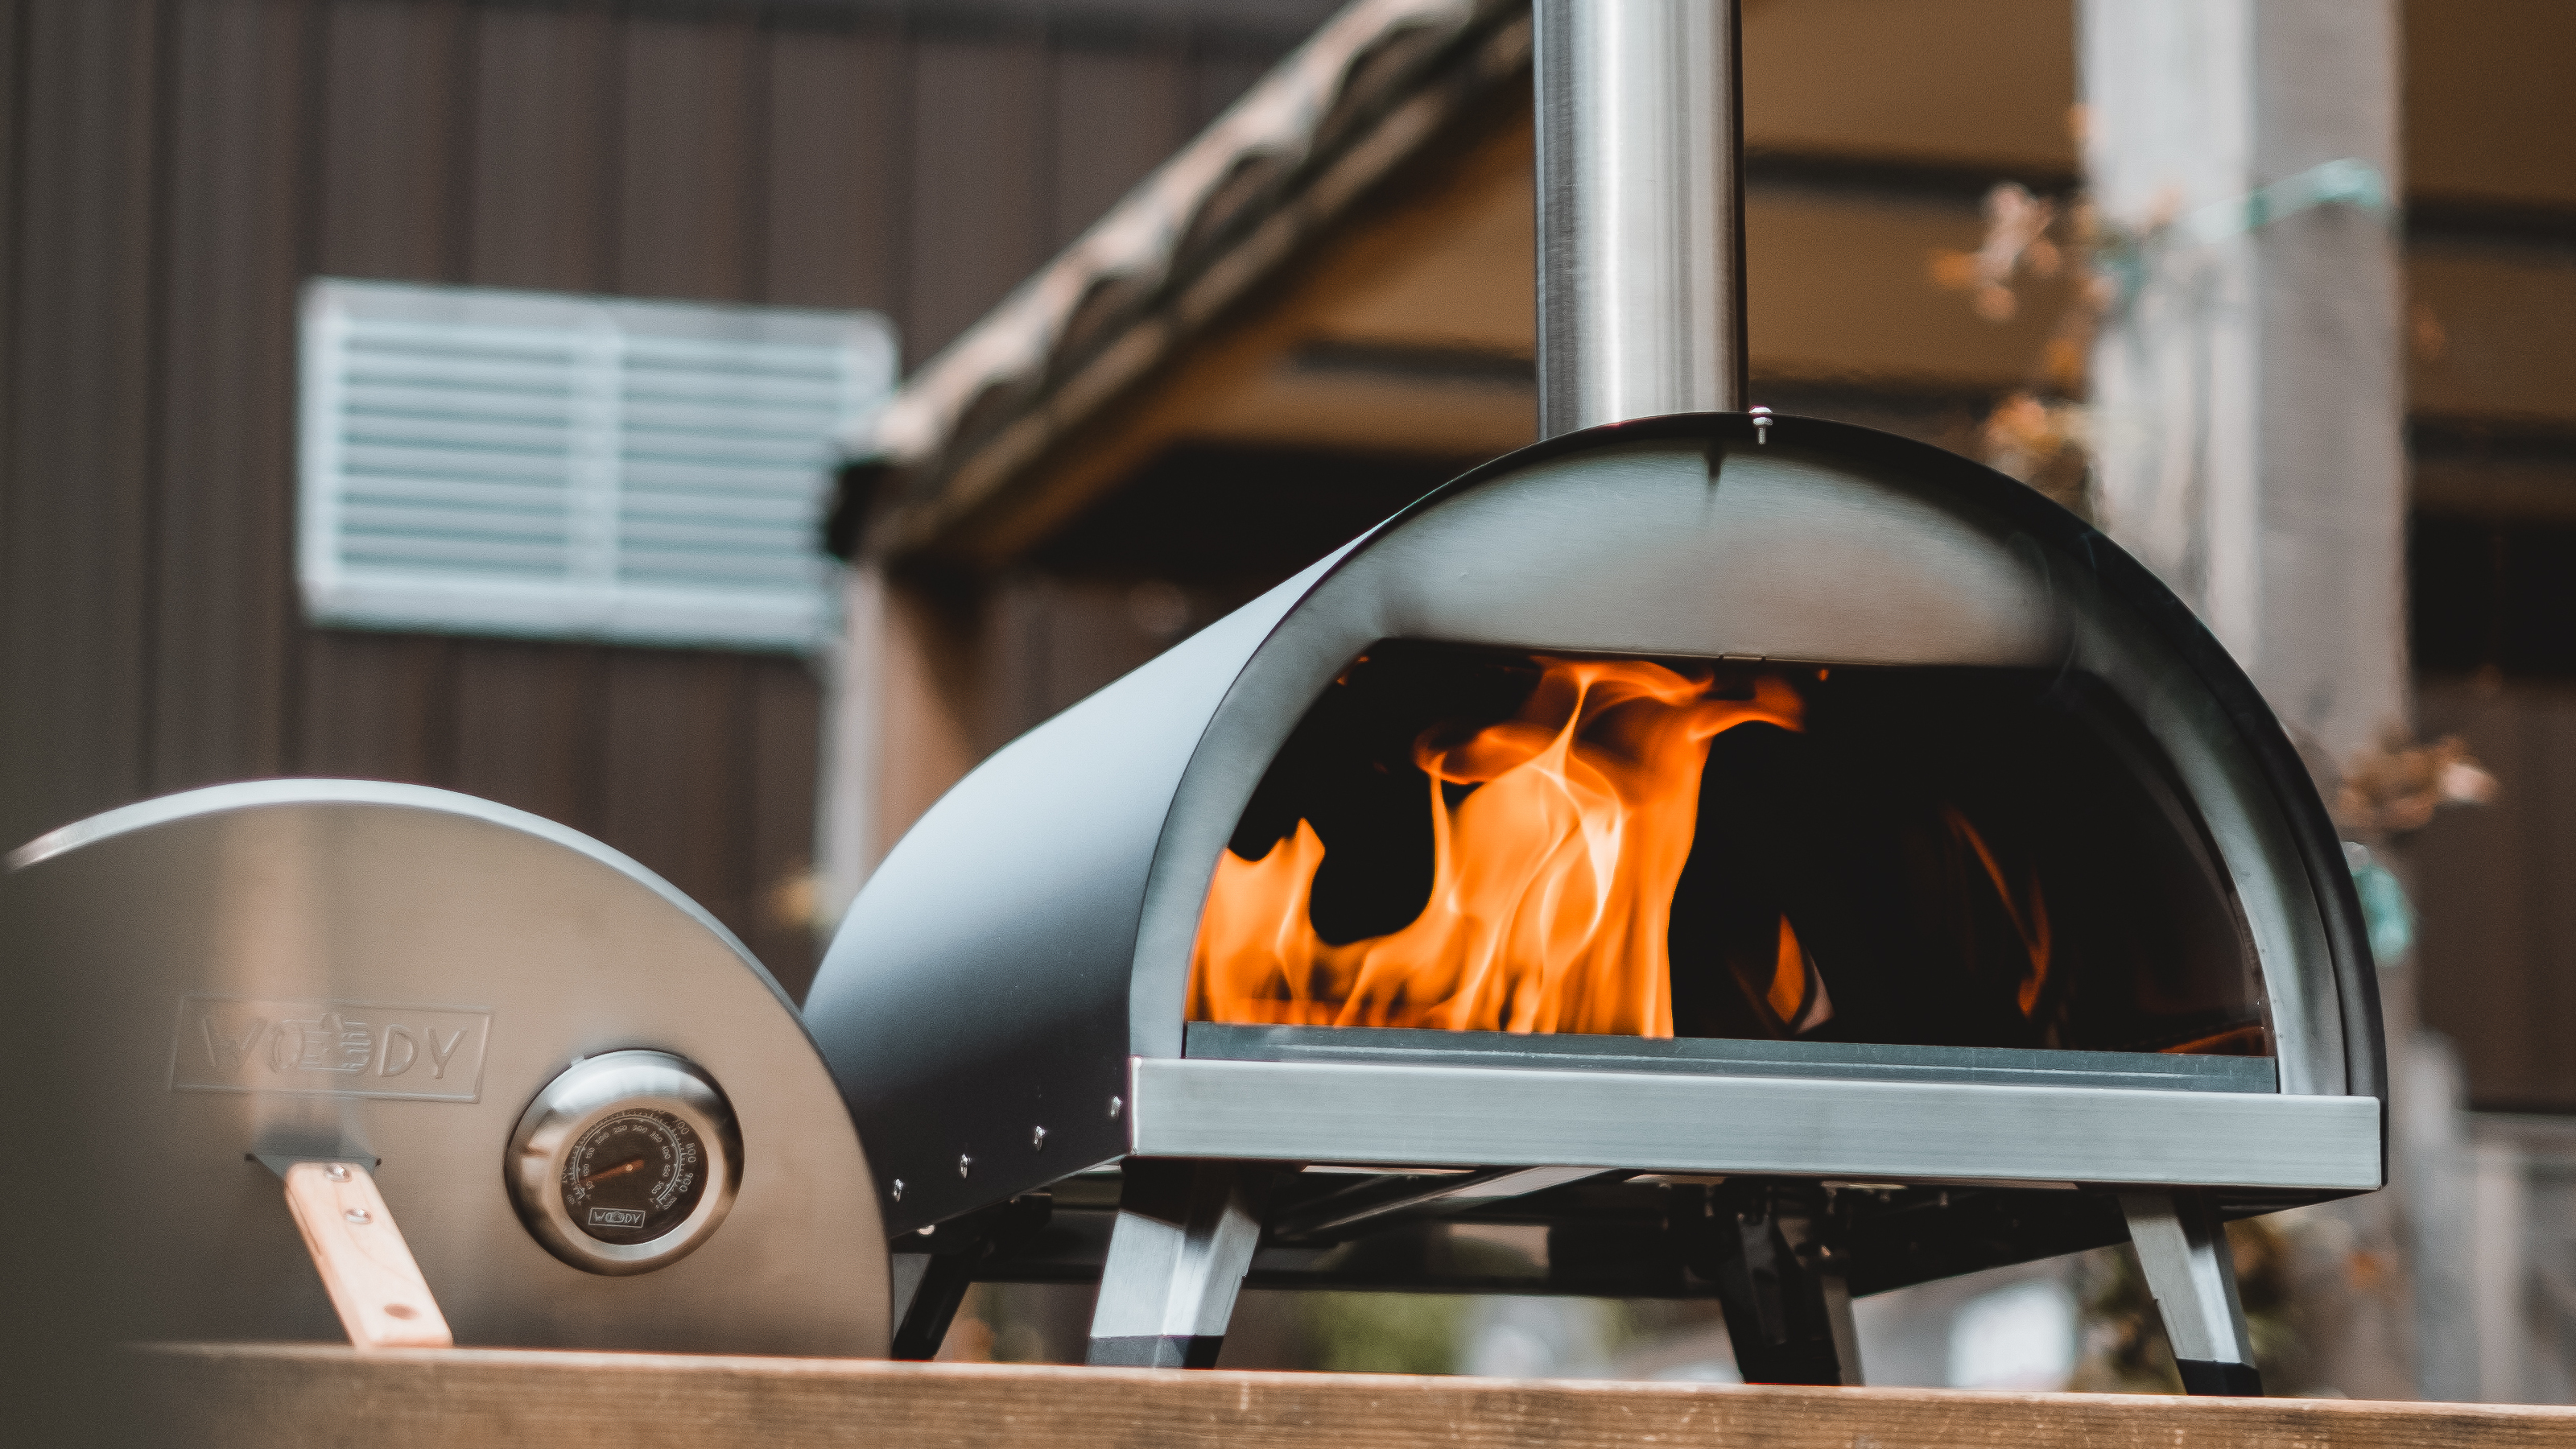 Wood fired outdoor pizza ovens, accessories to heat up summer dining 